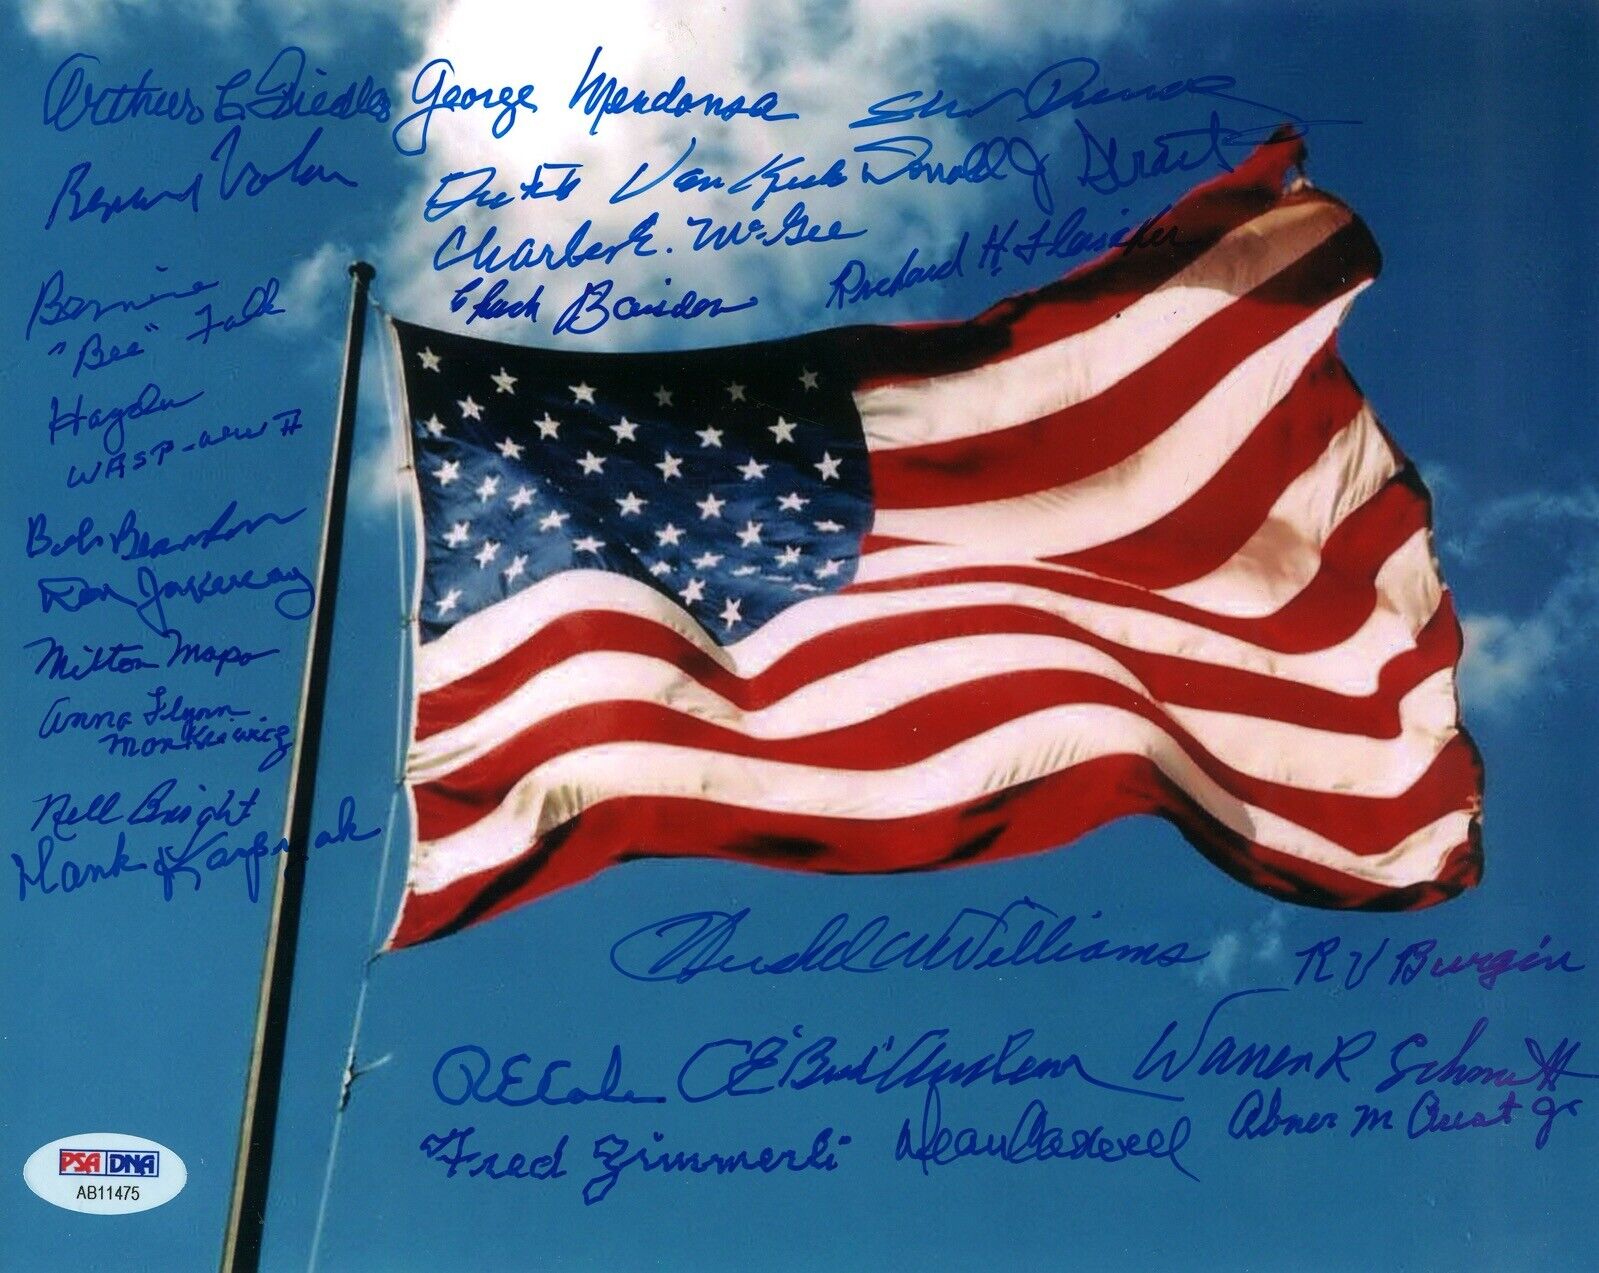 WWII VETERANS MULTI SIGNED 8X10 PHOTO PSA DNA AB11475 X24 ACES D-DAY WASP VETS